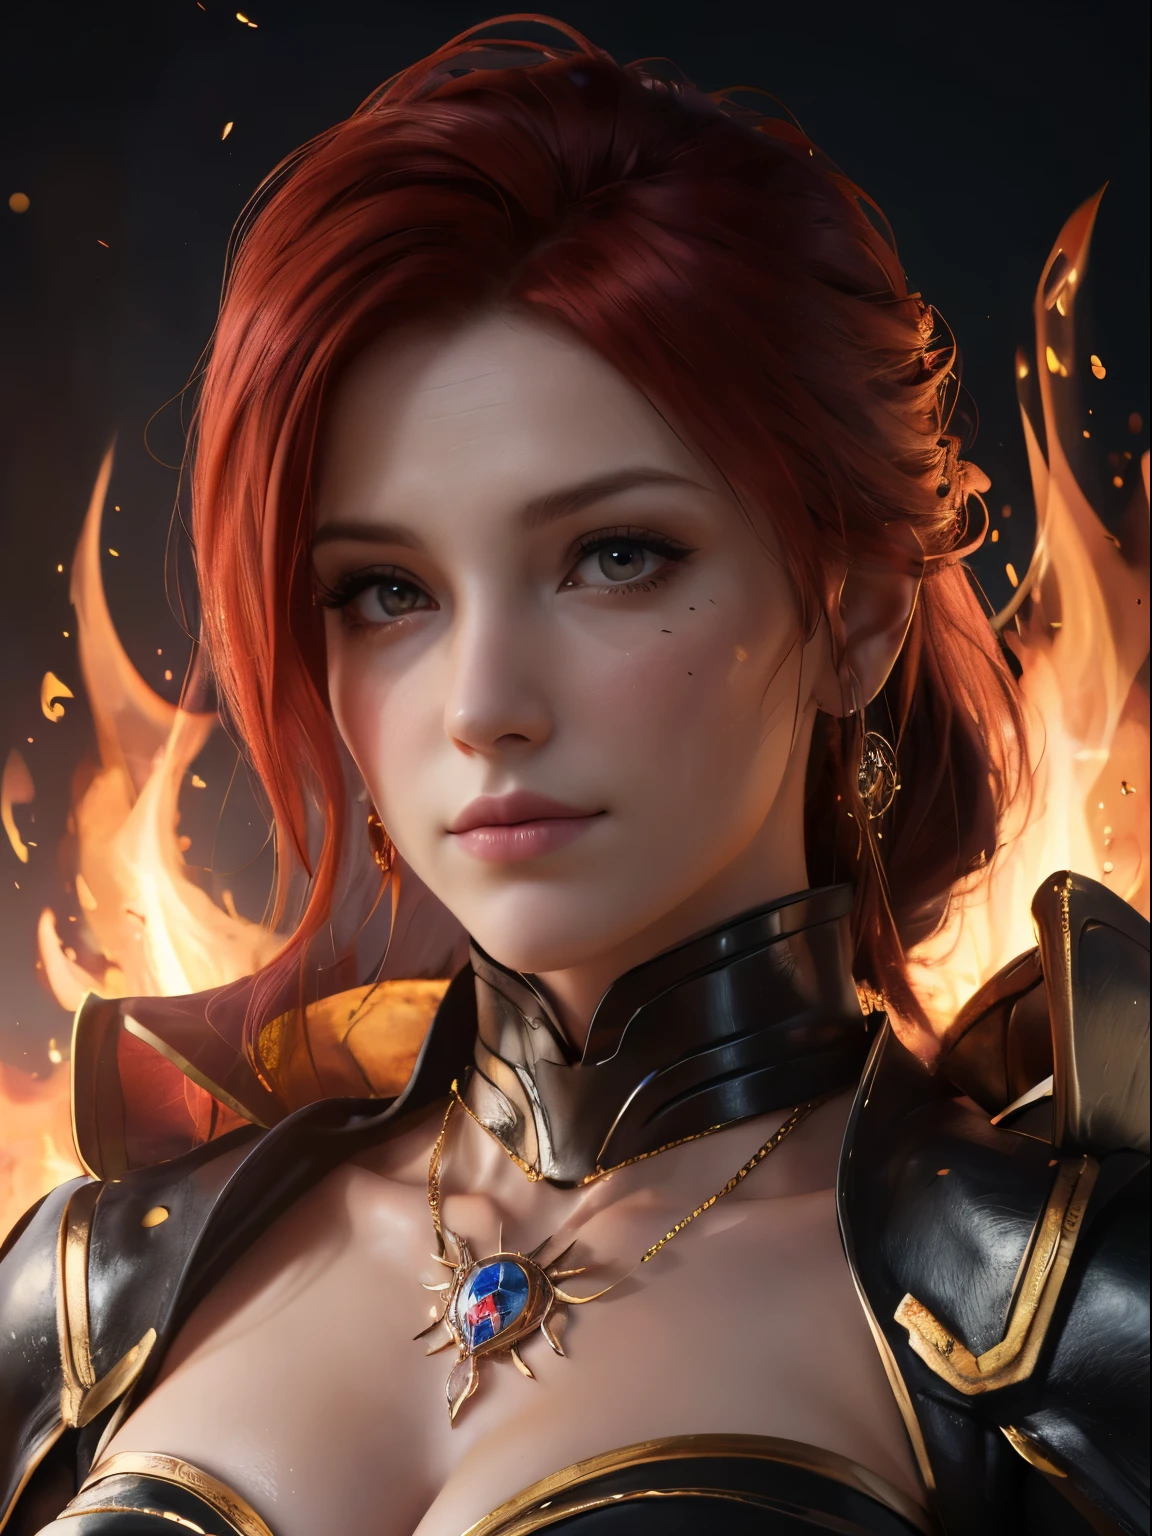 (headshot) (best quality) (high detail) woman's face with eyes of fire and fiery hair flowing in front of her face, Cinders swirling in the air, fire embers around her, (pyro) fire tattoos, flame tattoos, tattoos, smirk, fiery smoke in background, HDR, 4K, 3D, digital art